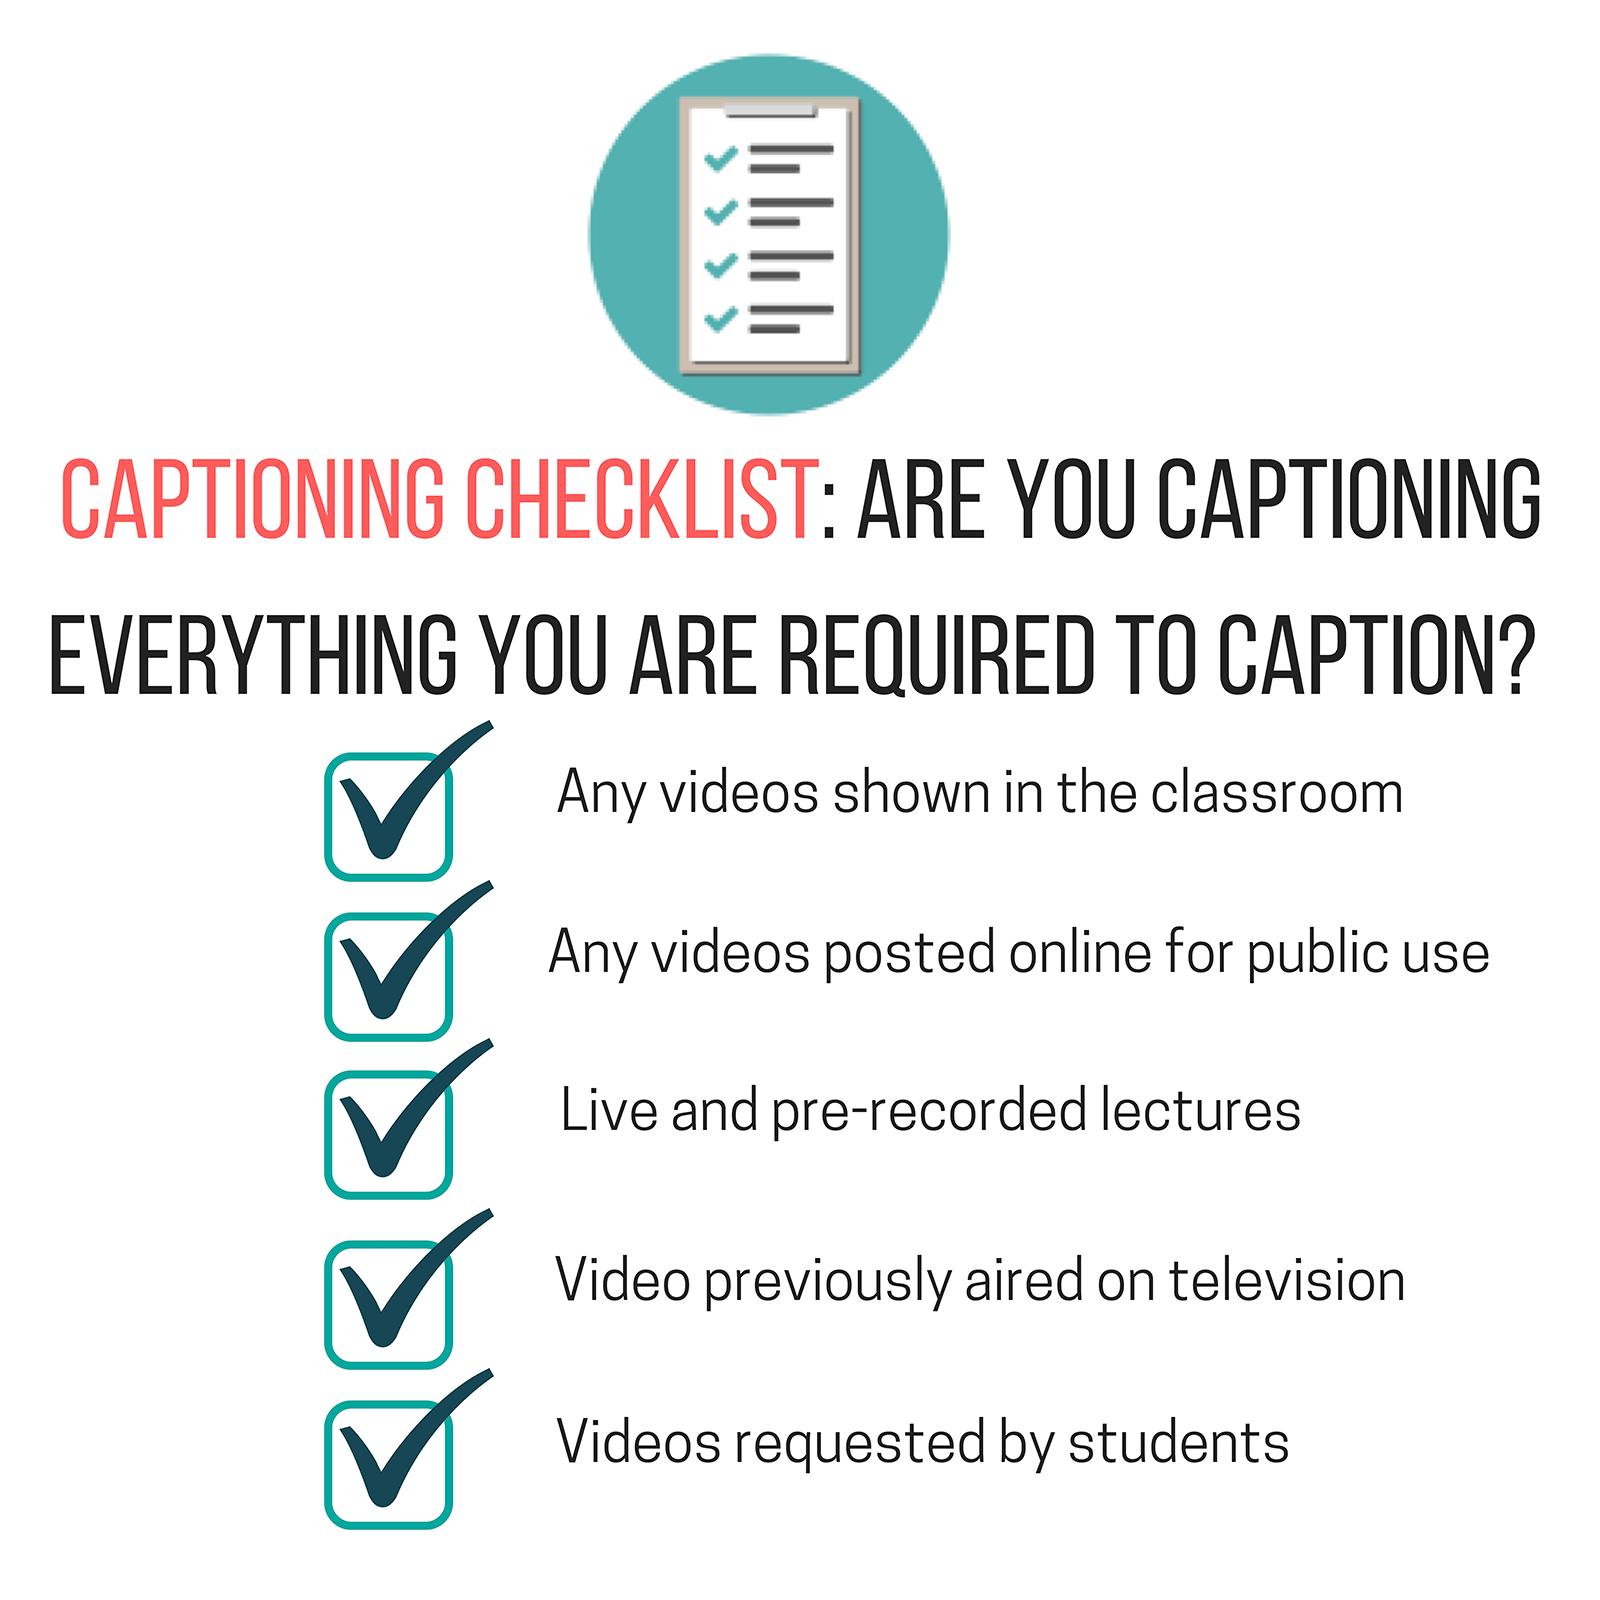 Captioning Checklist: Are you captioning everything you are required to caption? Any videos show in the classroom, any videos posted online, live and pre-recorded lectures, video previously aired on television, videos requested by students